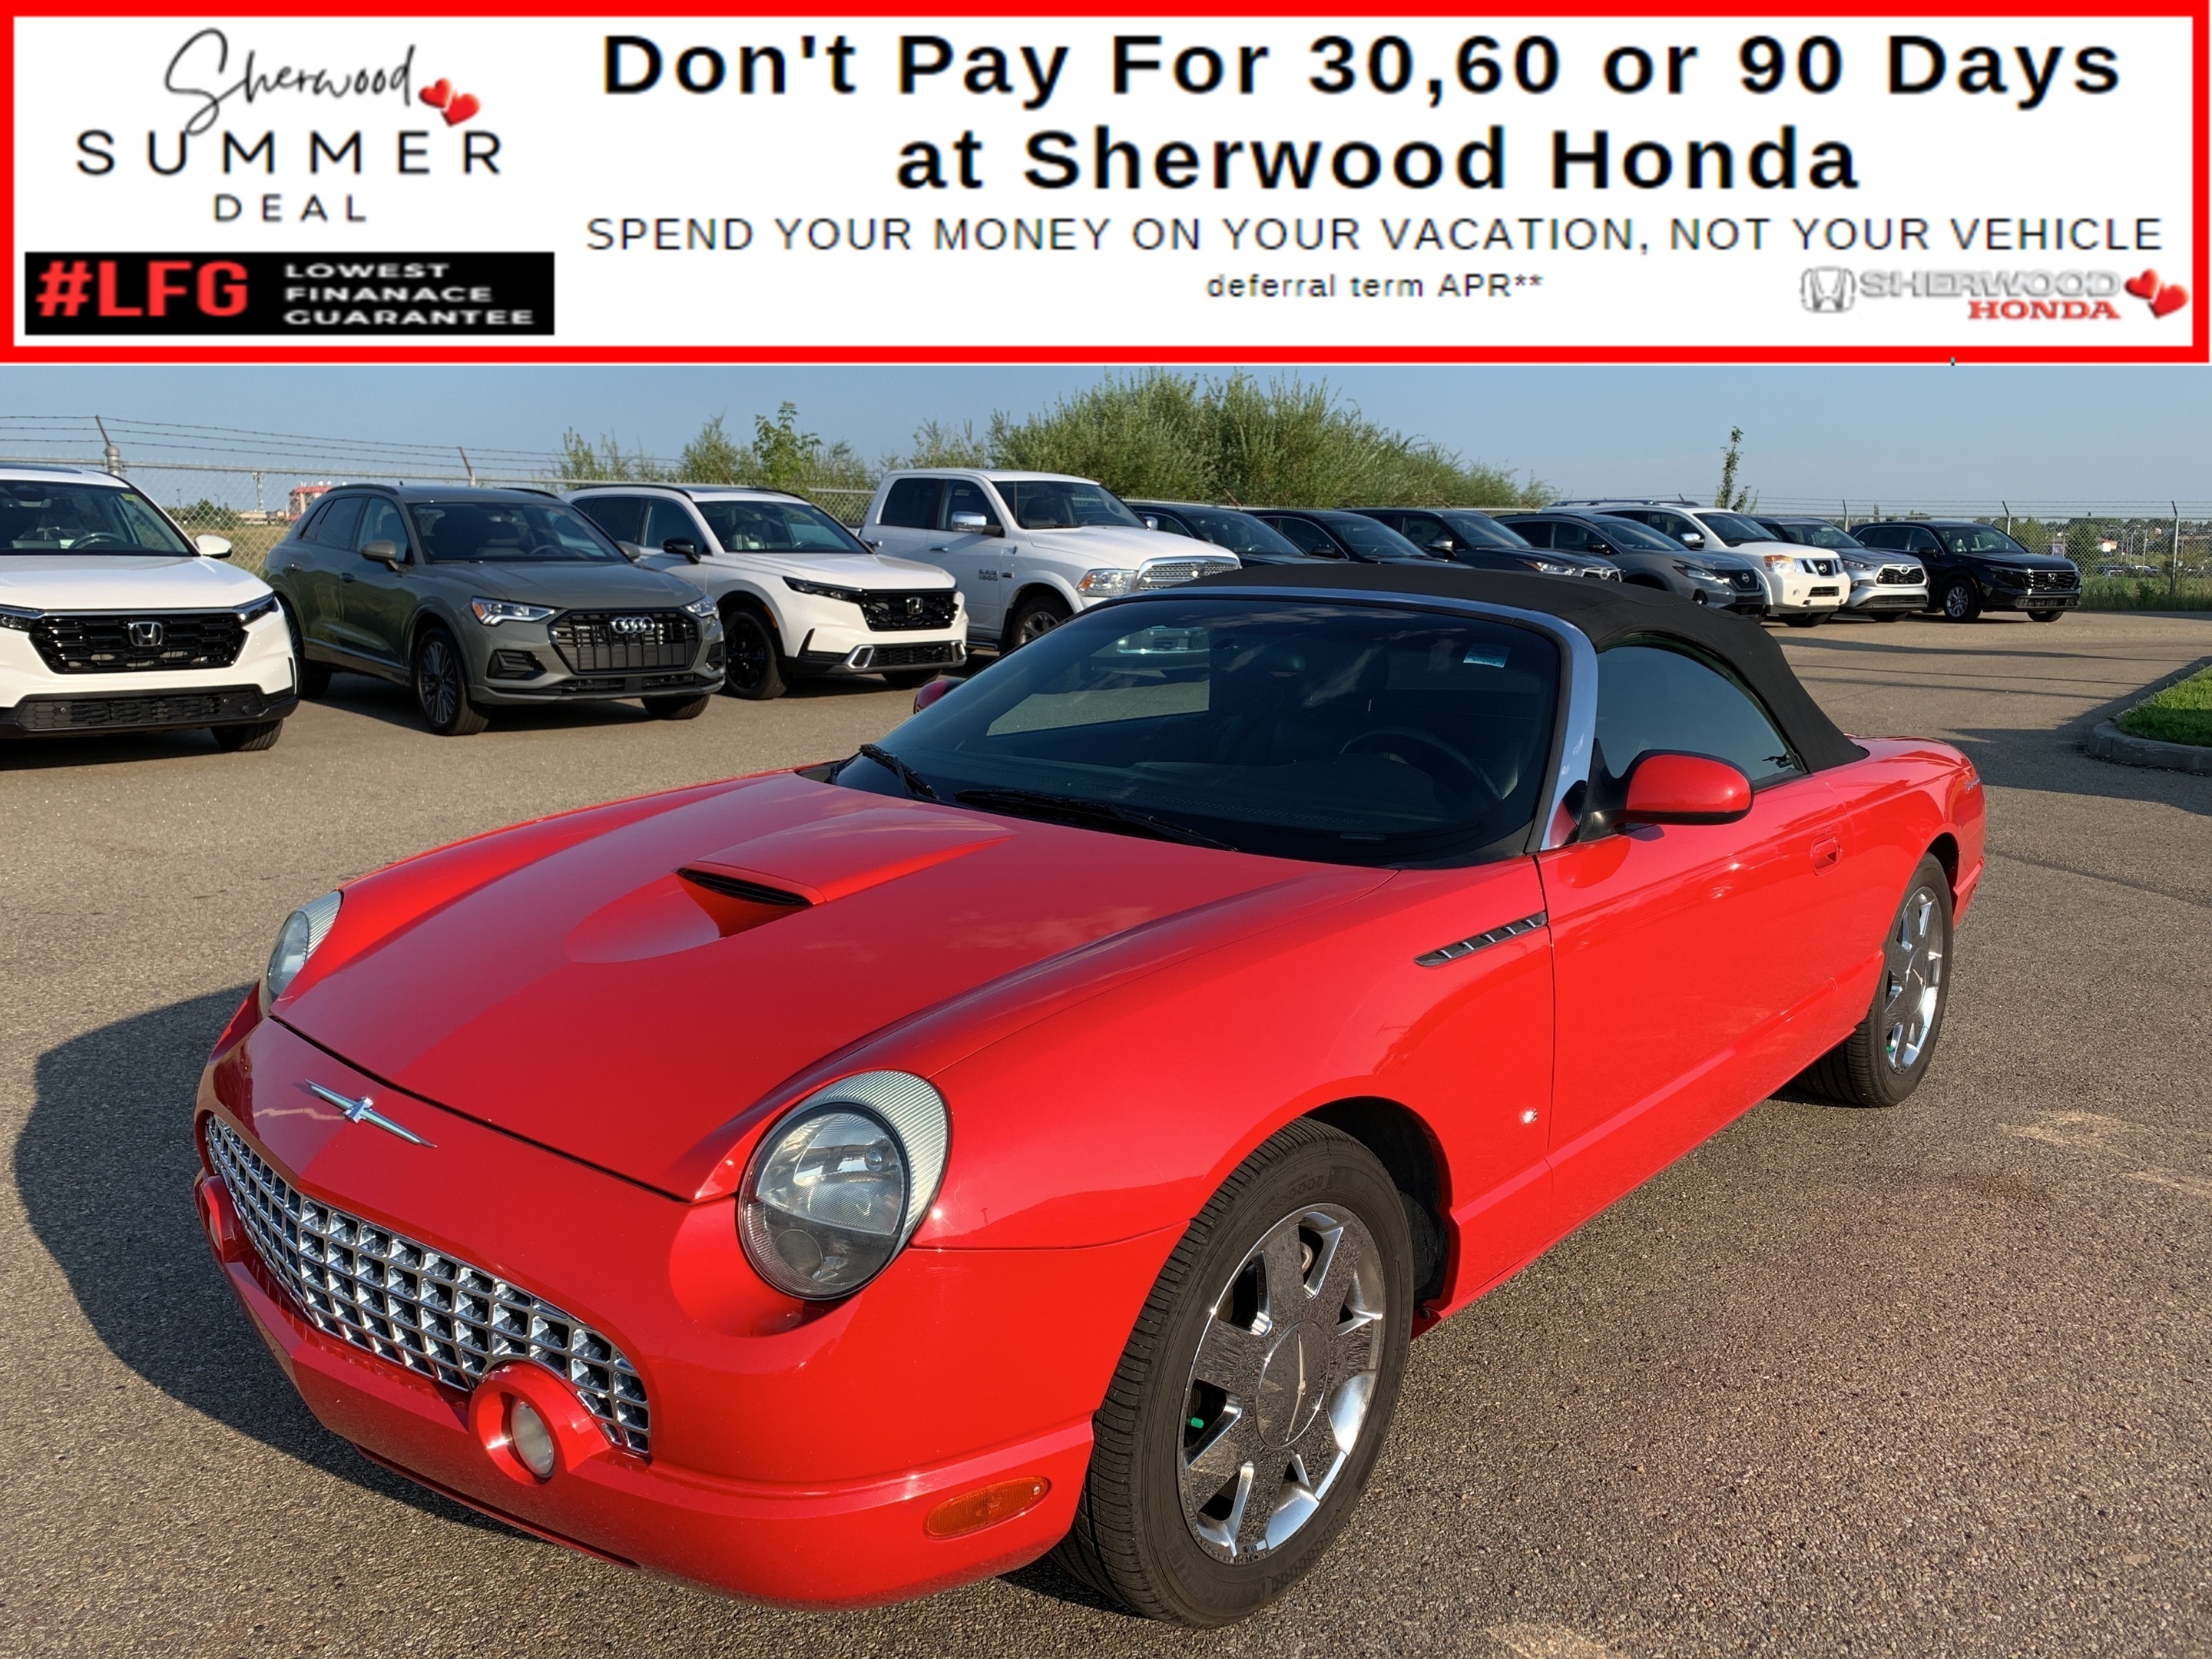 2003 Ford Thunderbird 2dr Convertible | LOW KMS | HEATED LEATHER